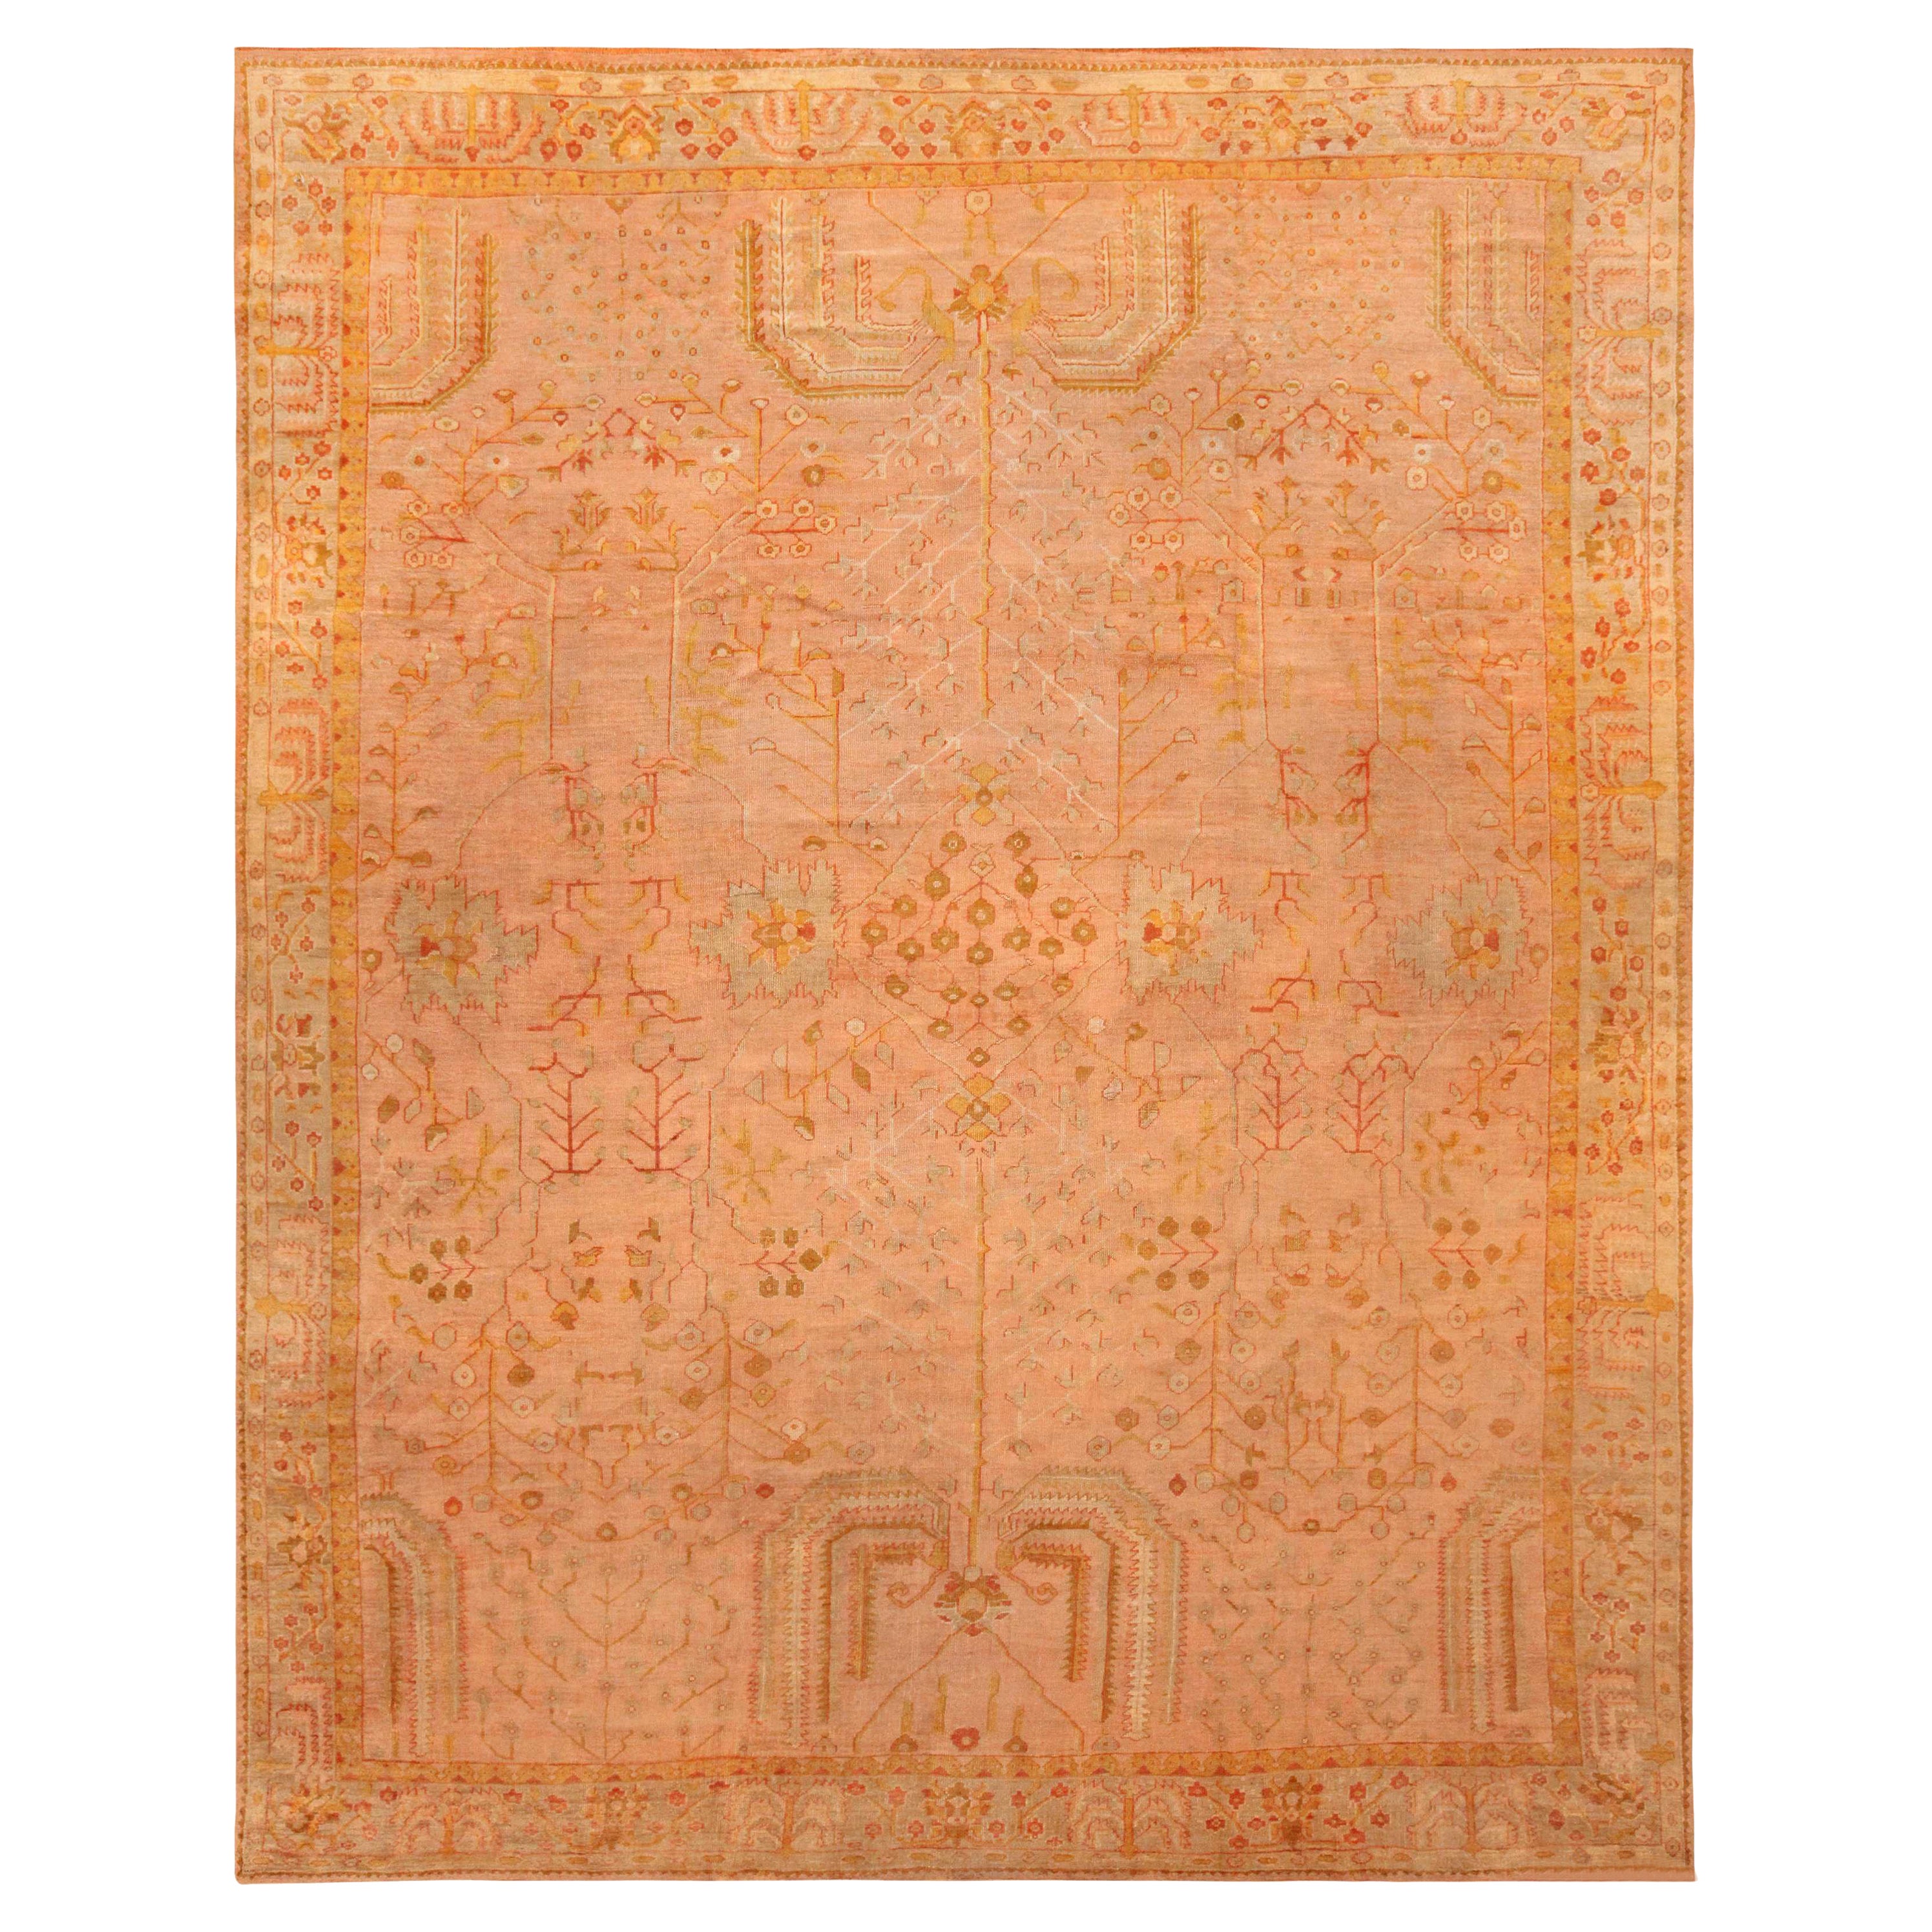 Nazmiyal Collection Antique Turkish Oushak Rug. 12 ft 9 in x 15 ft 10 in